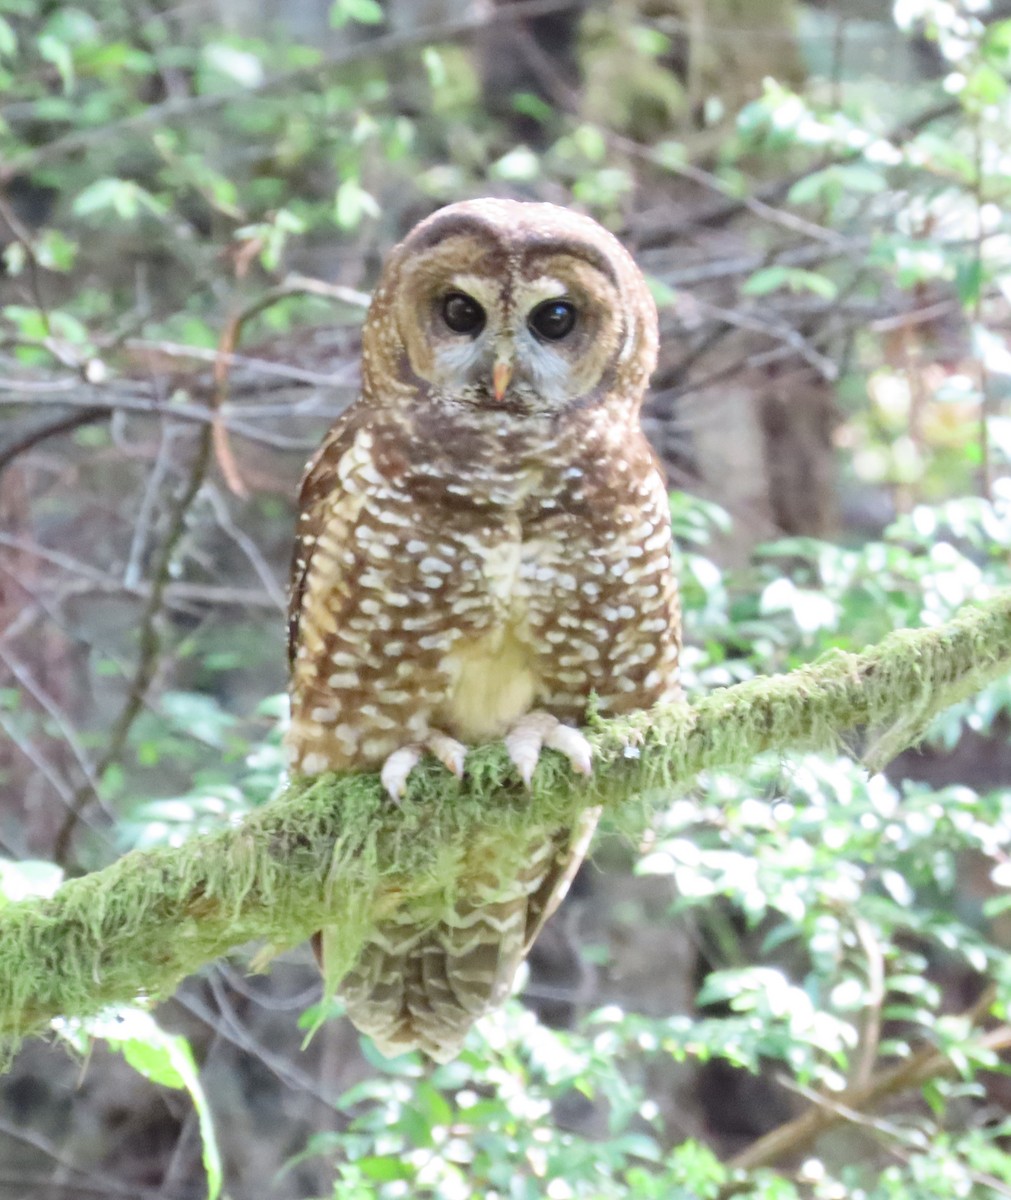 Spotted Owl - The Spotting Twohees